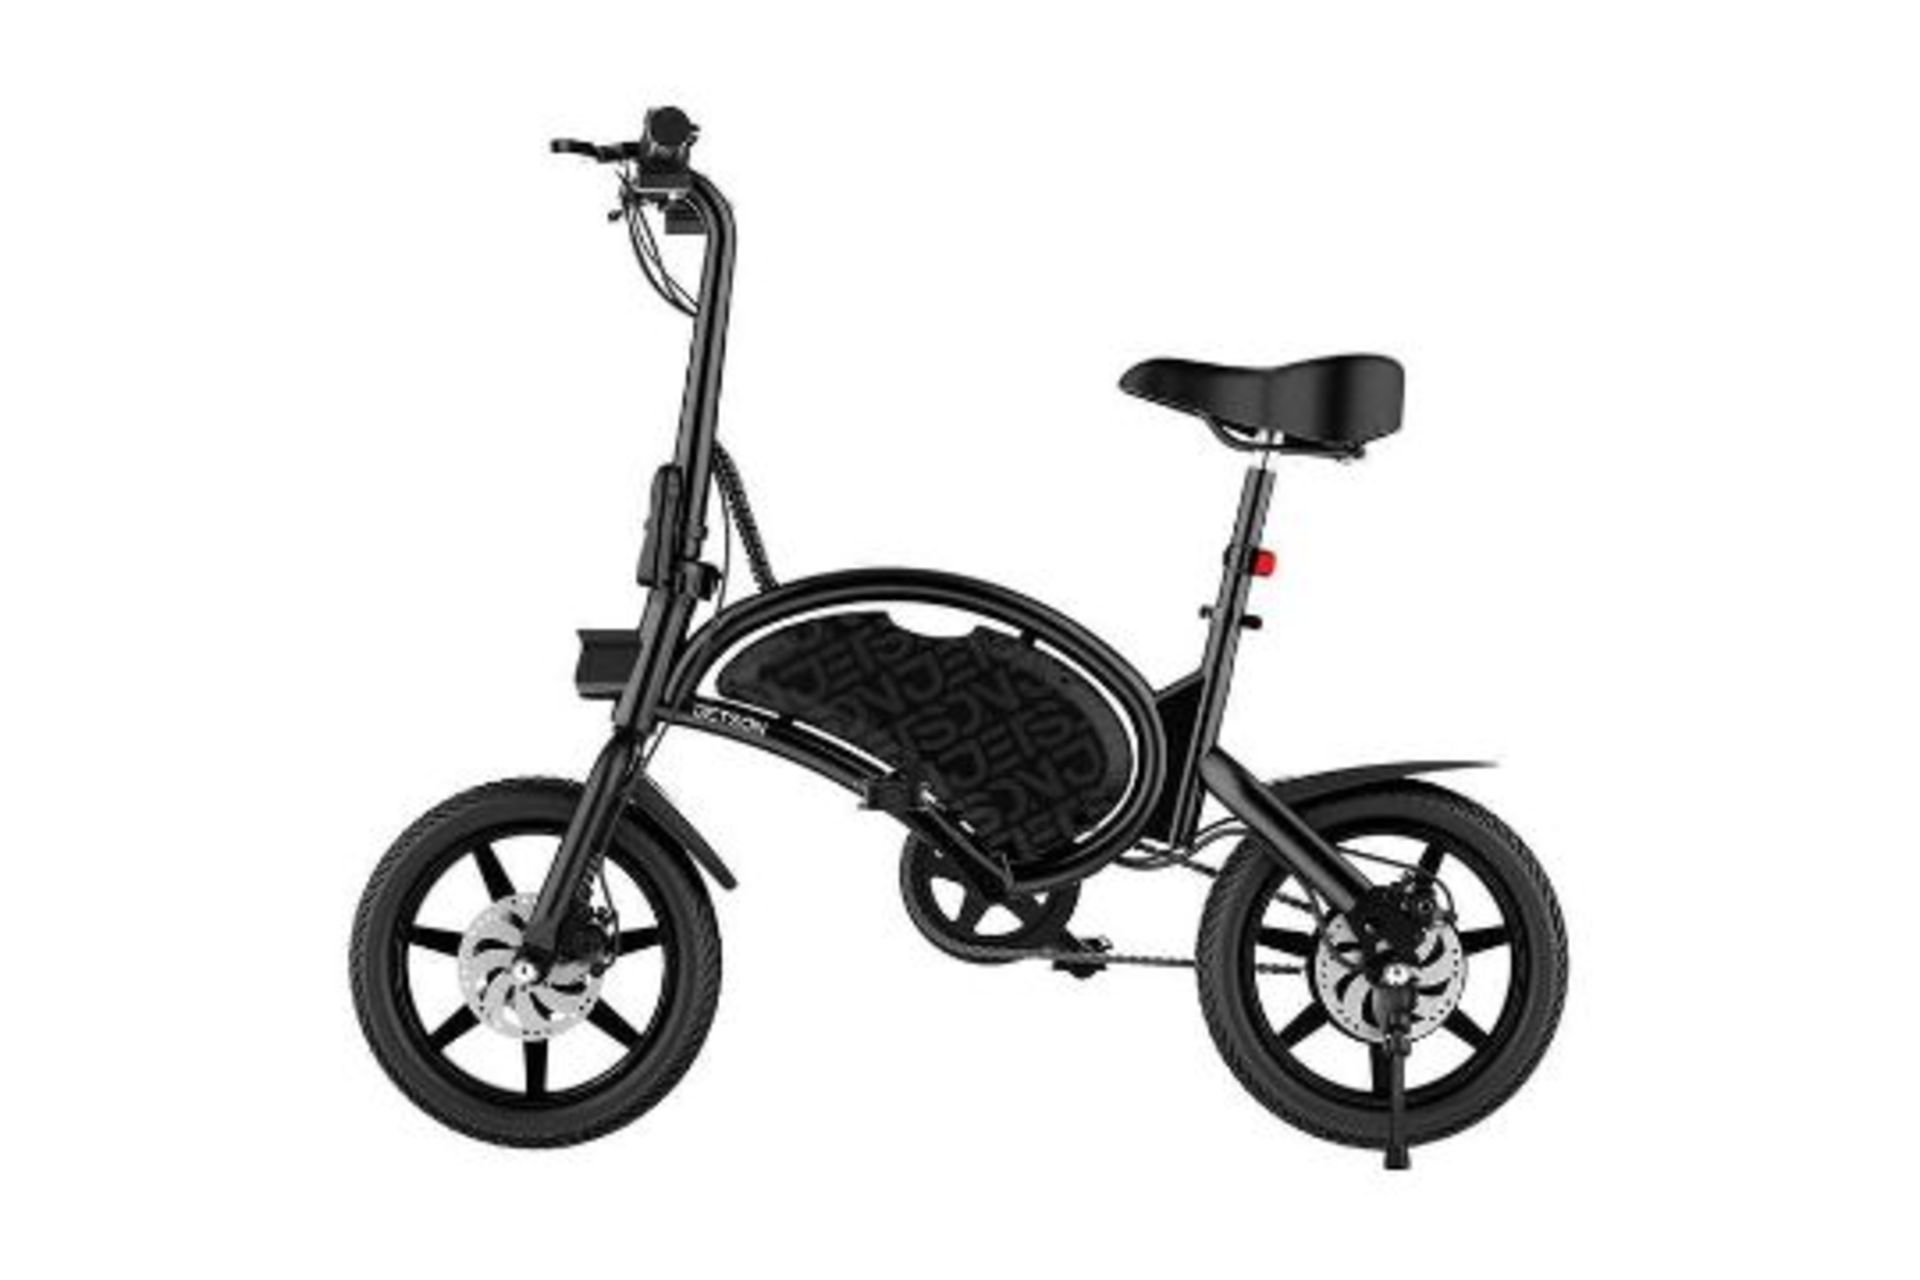 1 JETSON BOLT PRO FOLDING PEDAL ELECTRIC BIKE WITH CHARGER RRP Â£399 (REAR WHEEL JAMMED, GENERIC